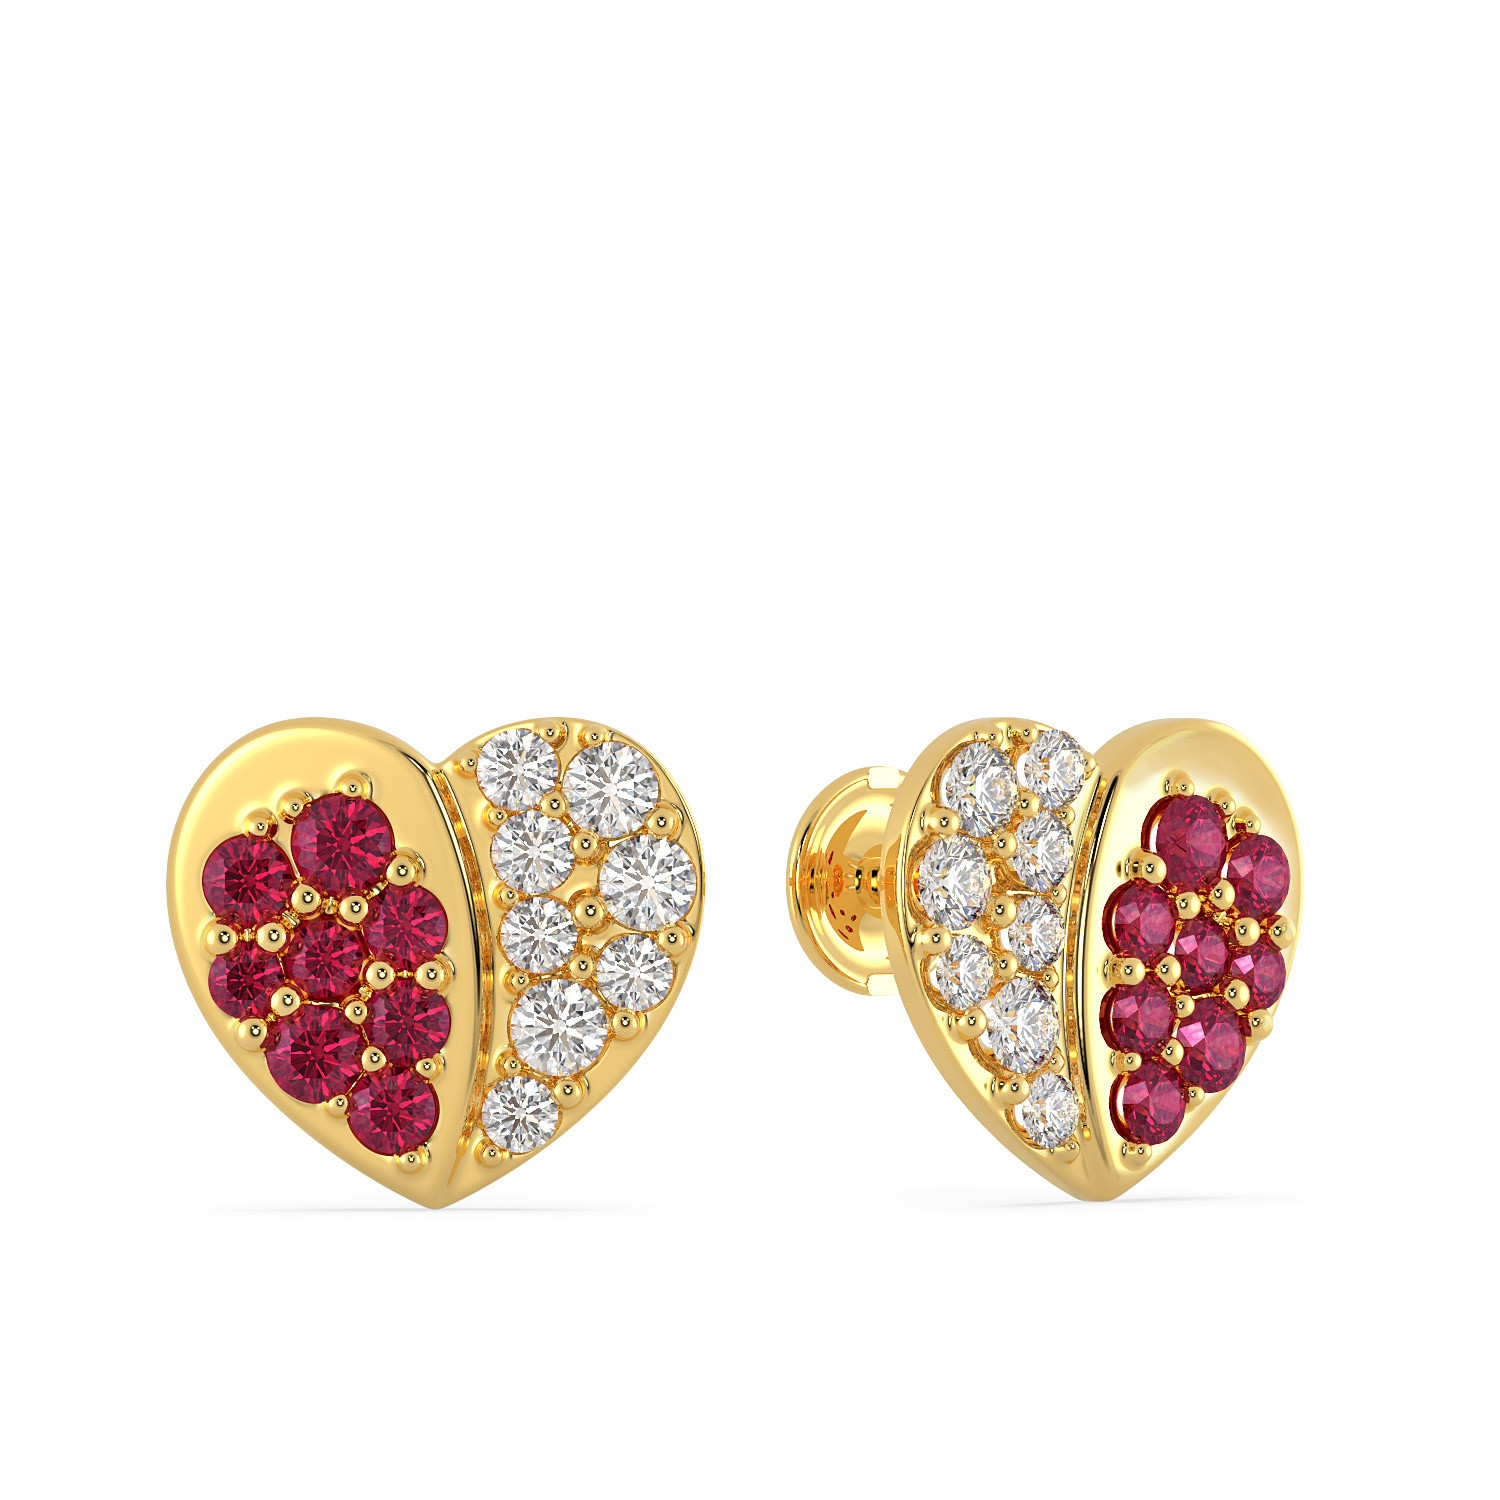 Malabar 22 KT Two Tone Gold Studded Earring EGSGHTYA0075